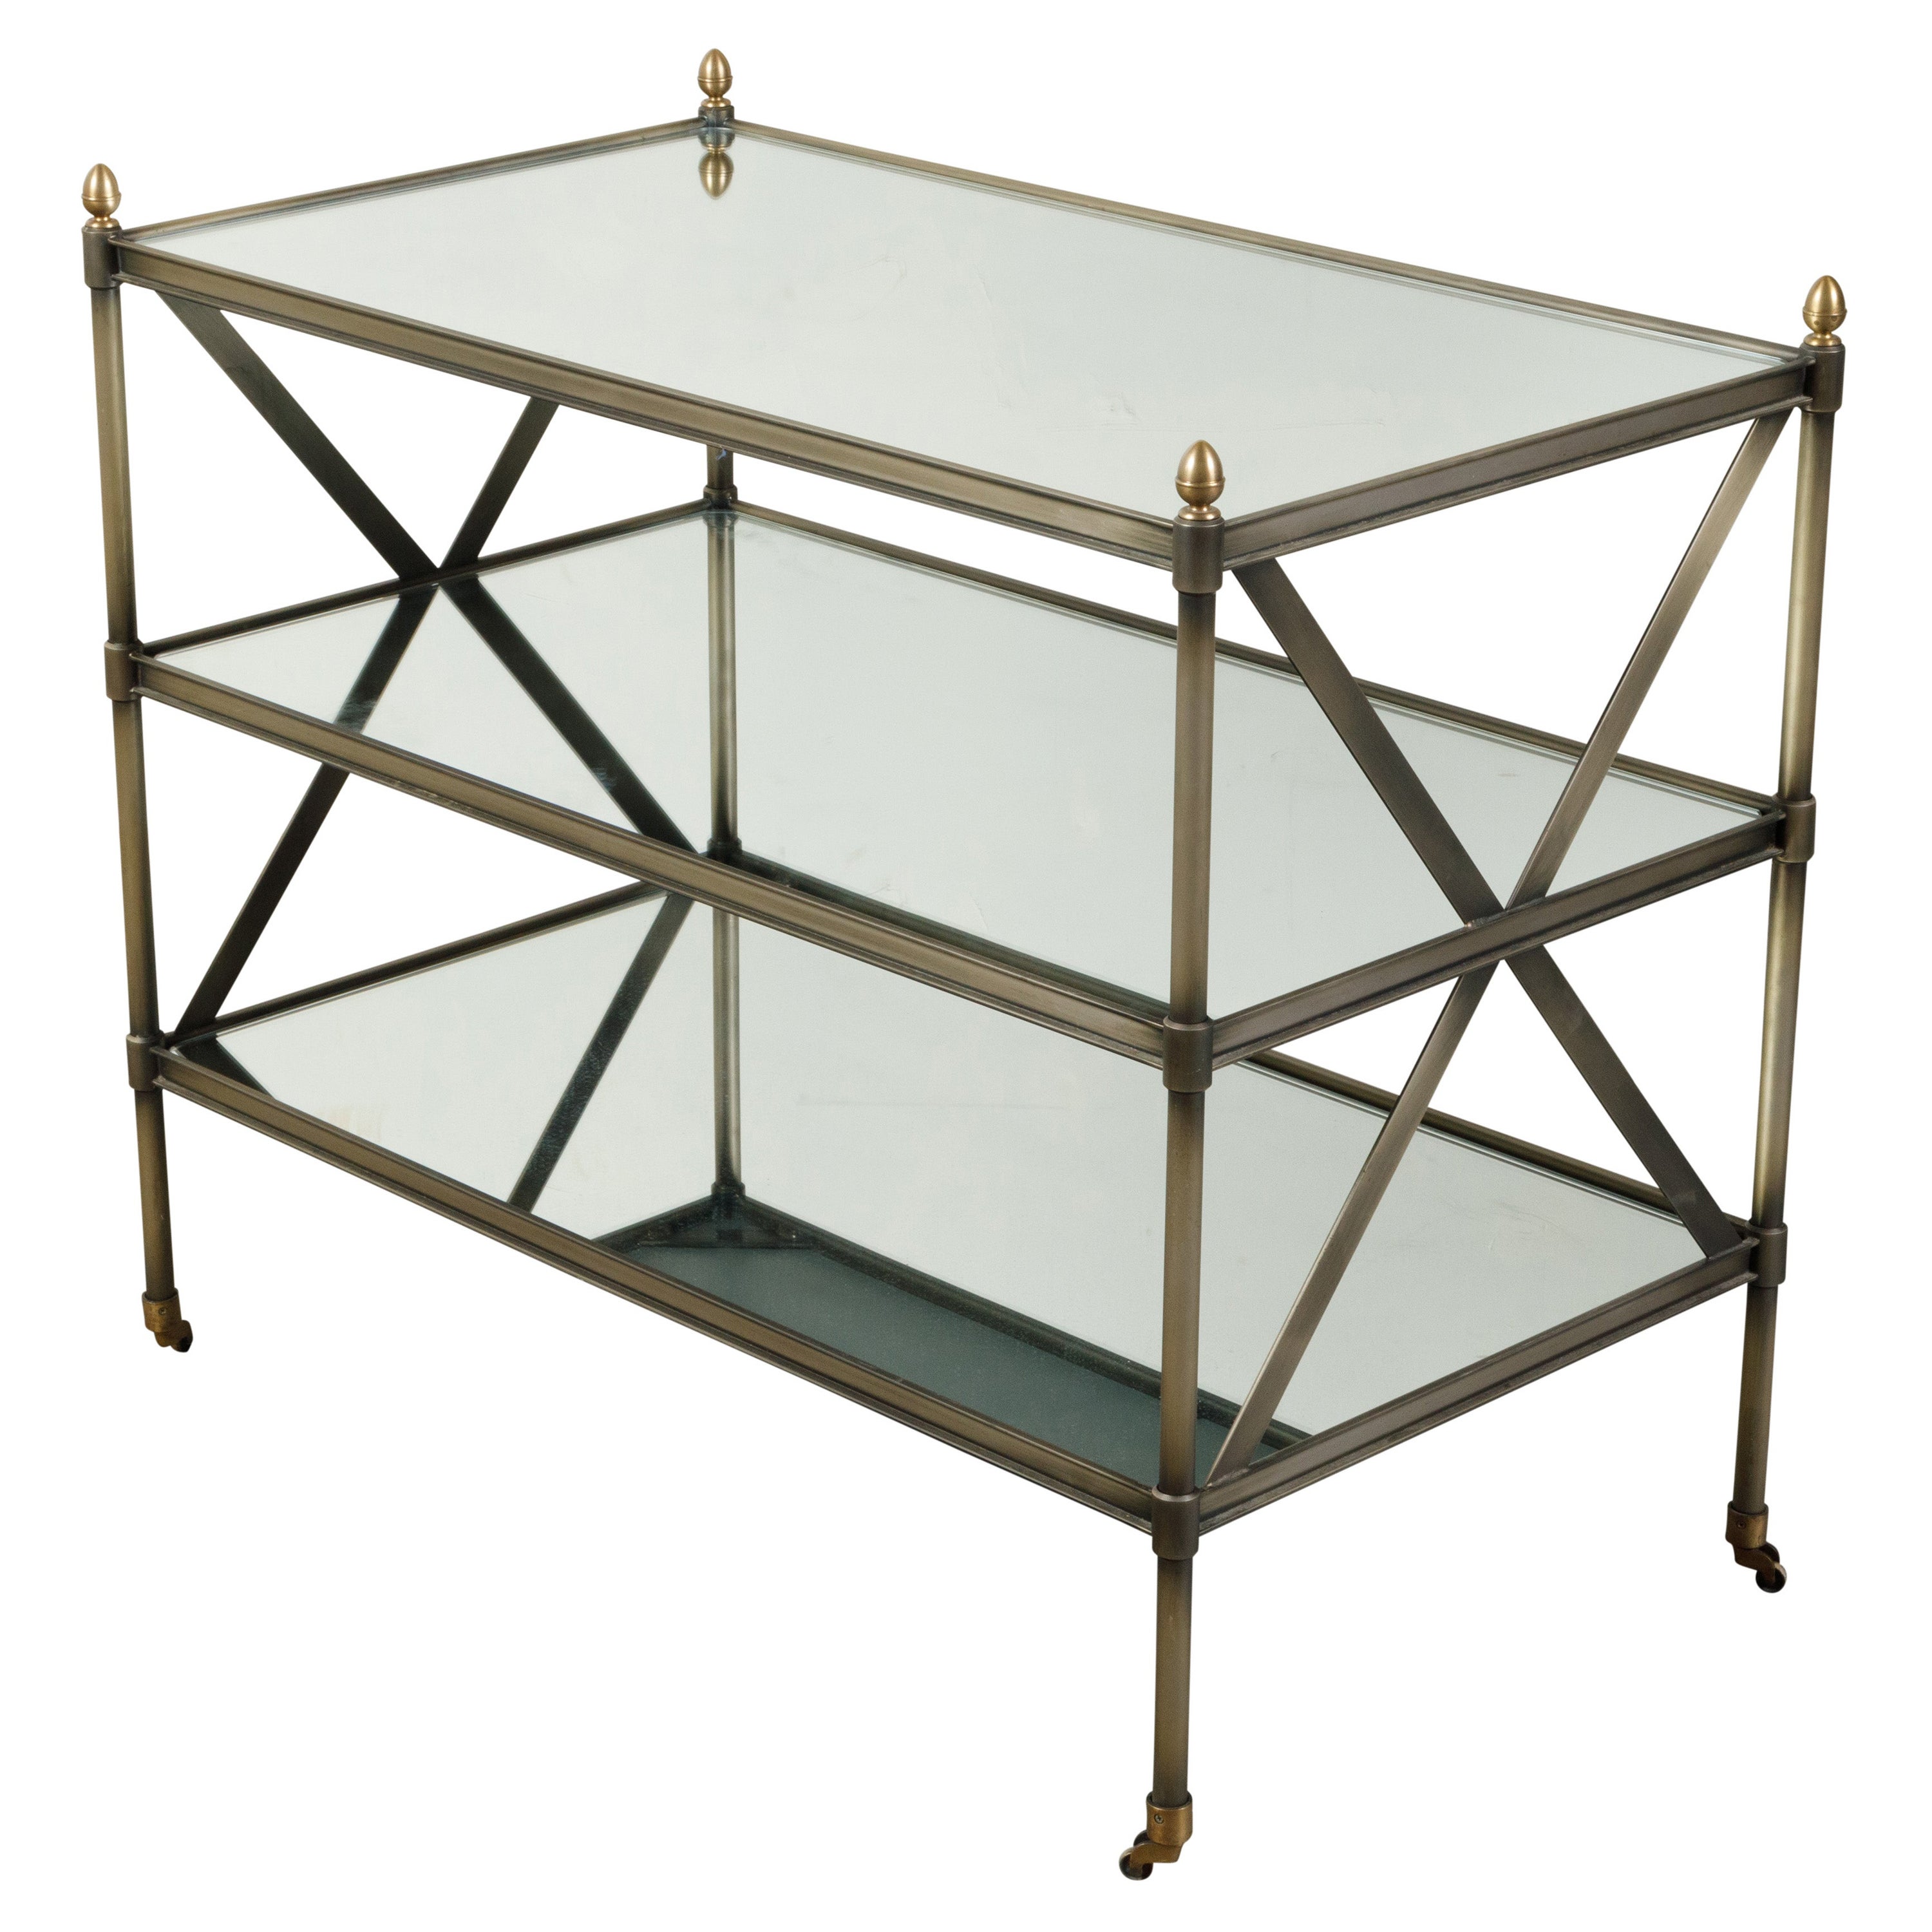 Italian Midcentury Patinated Metal Trolley with Mirrored Shelves and Casters For Sale